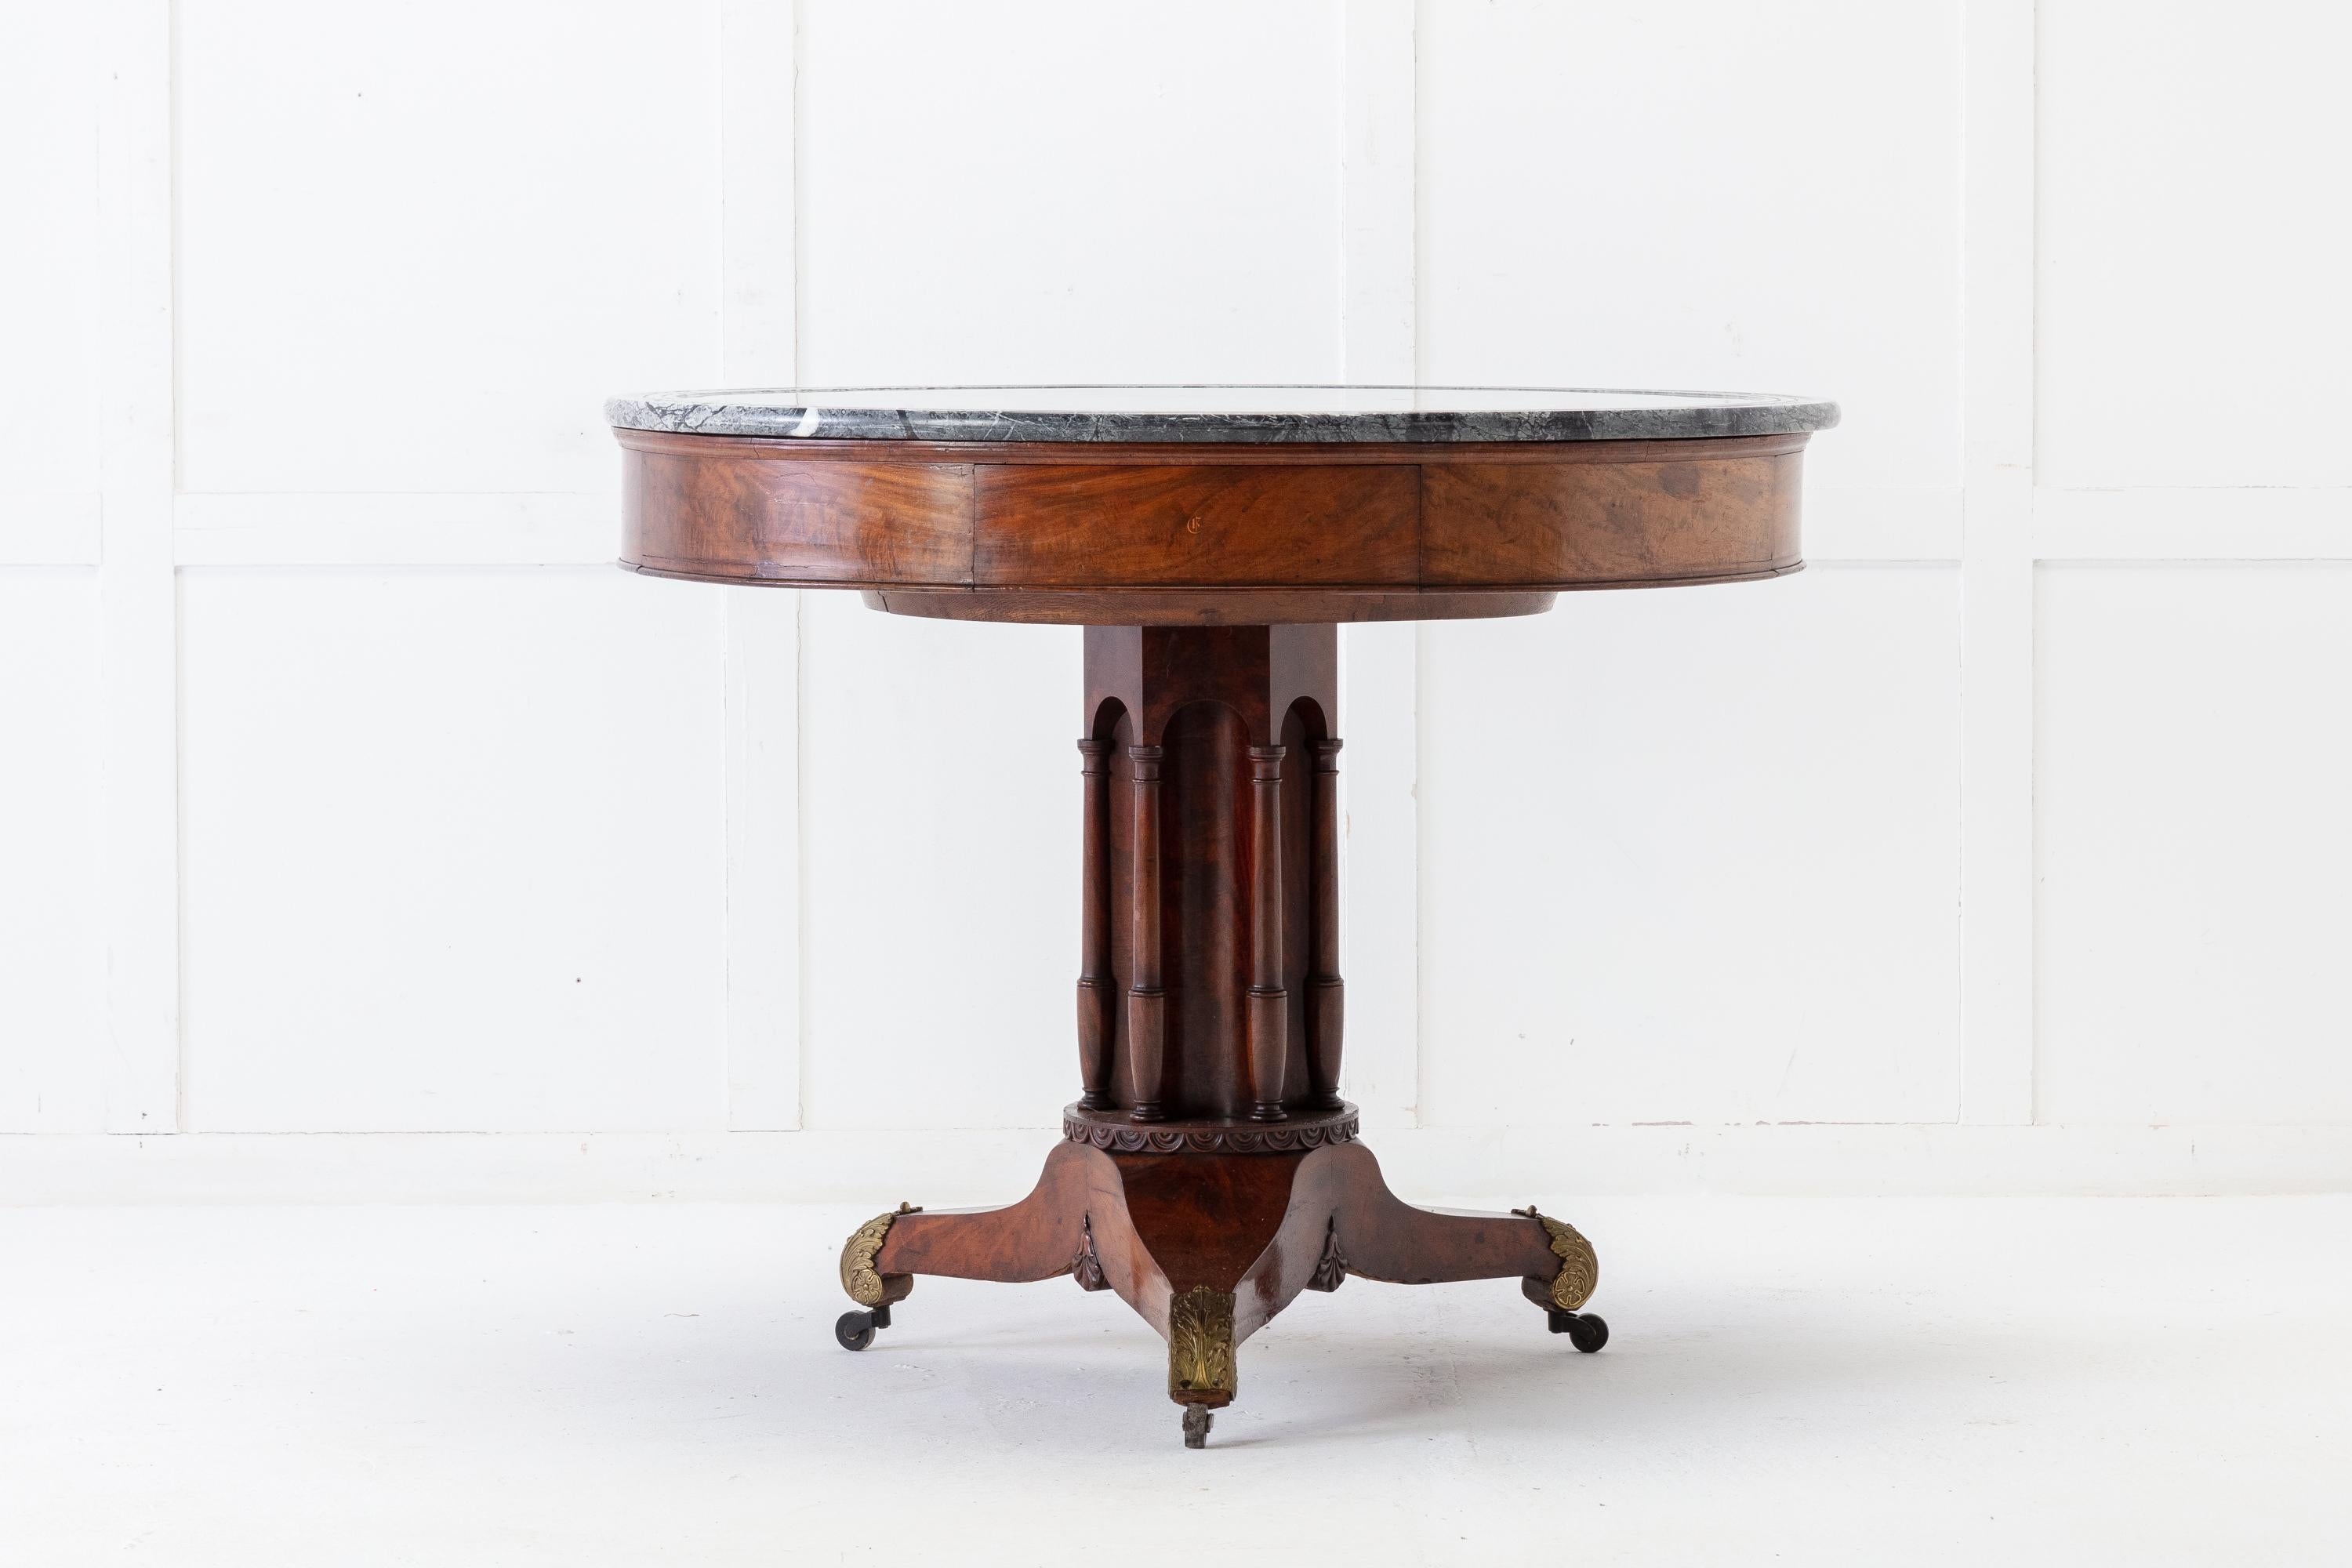 Early 19th century French mahogany table with a super marble top. Having four drawers with exceptional quality mahogany drawer liners. Each drawer having pretty inlaid initials. The top rests on a central stem, with applied pillars, above a